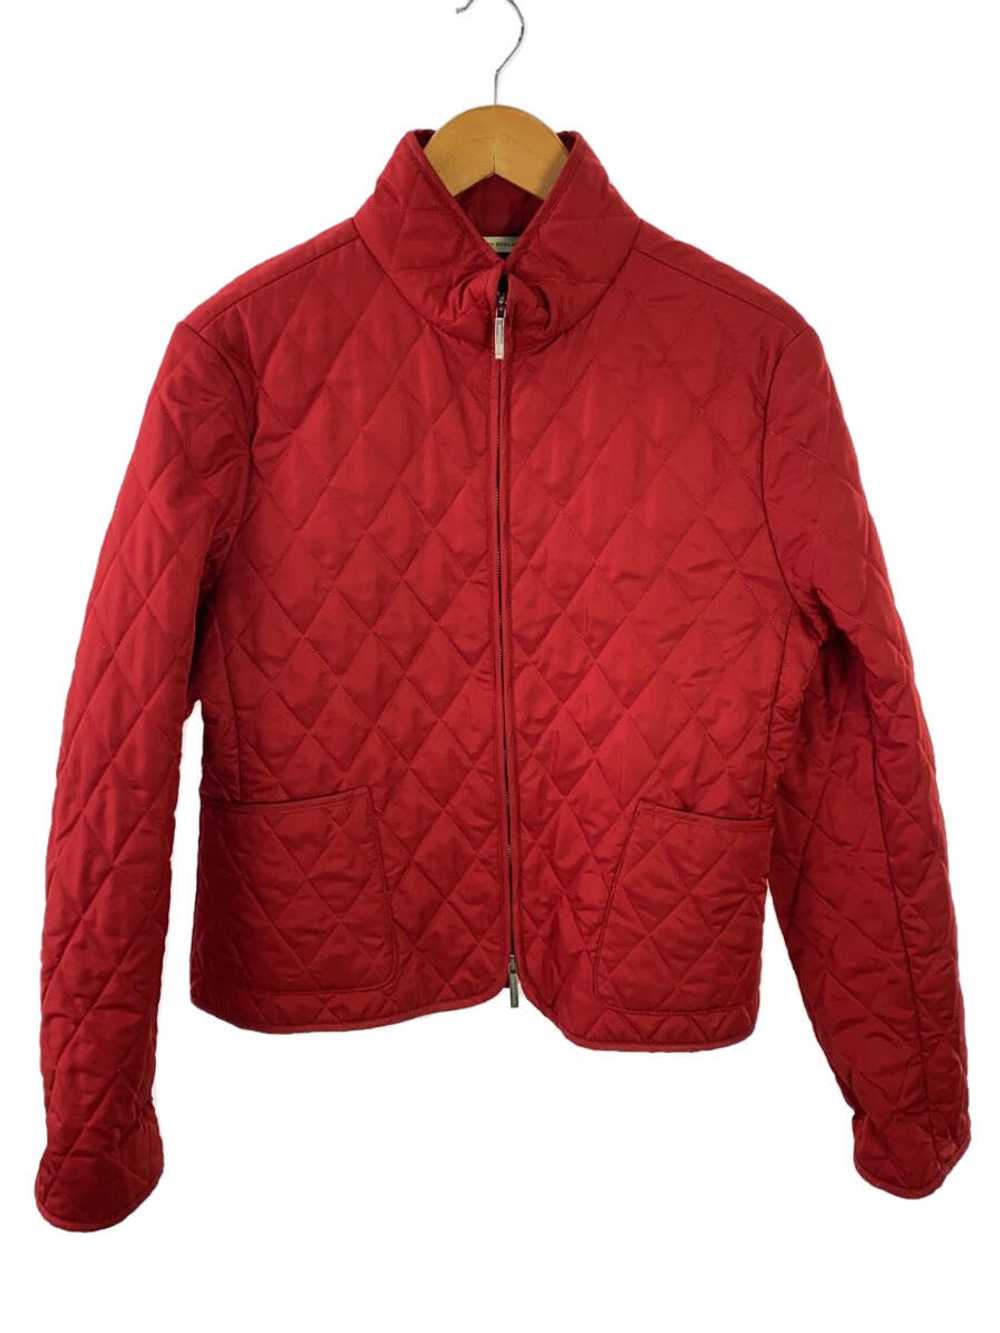 Burberry London Quilted Jacket/Nova Check Lining/… - image 1